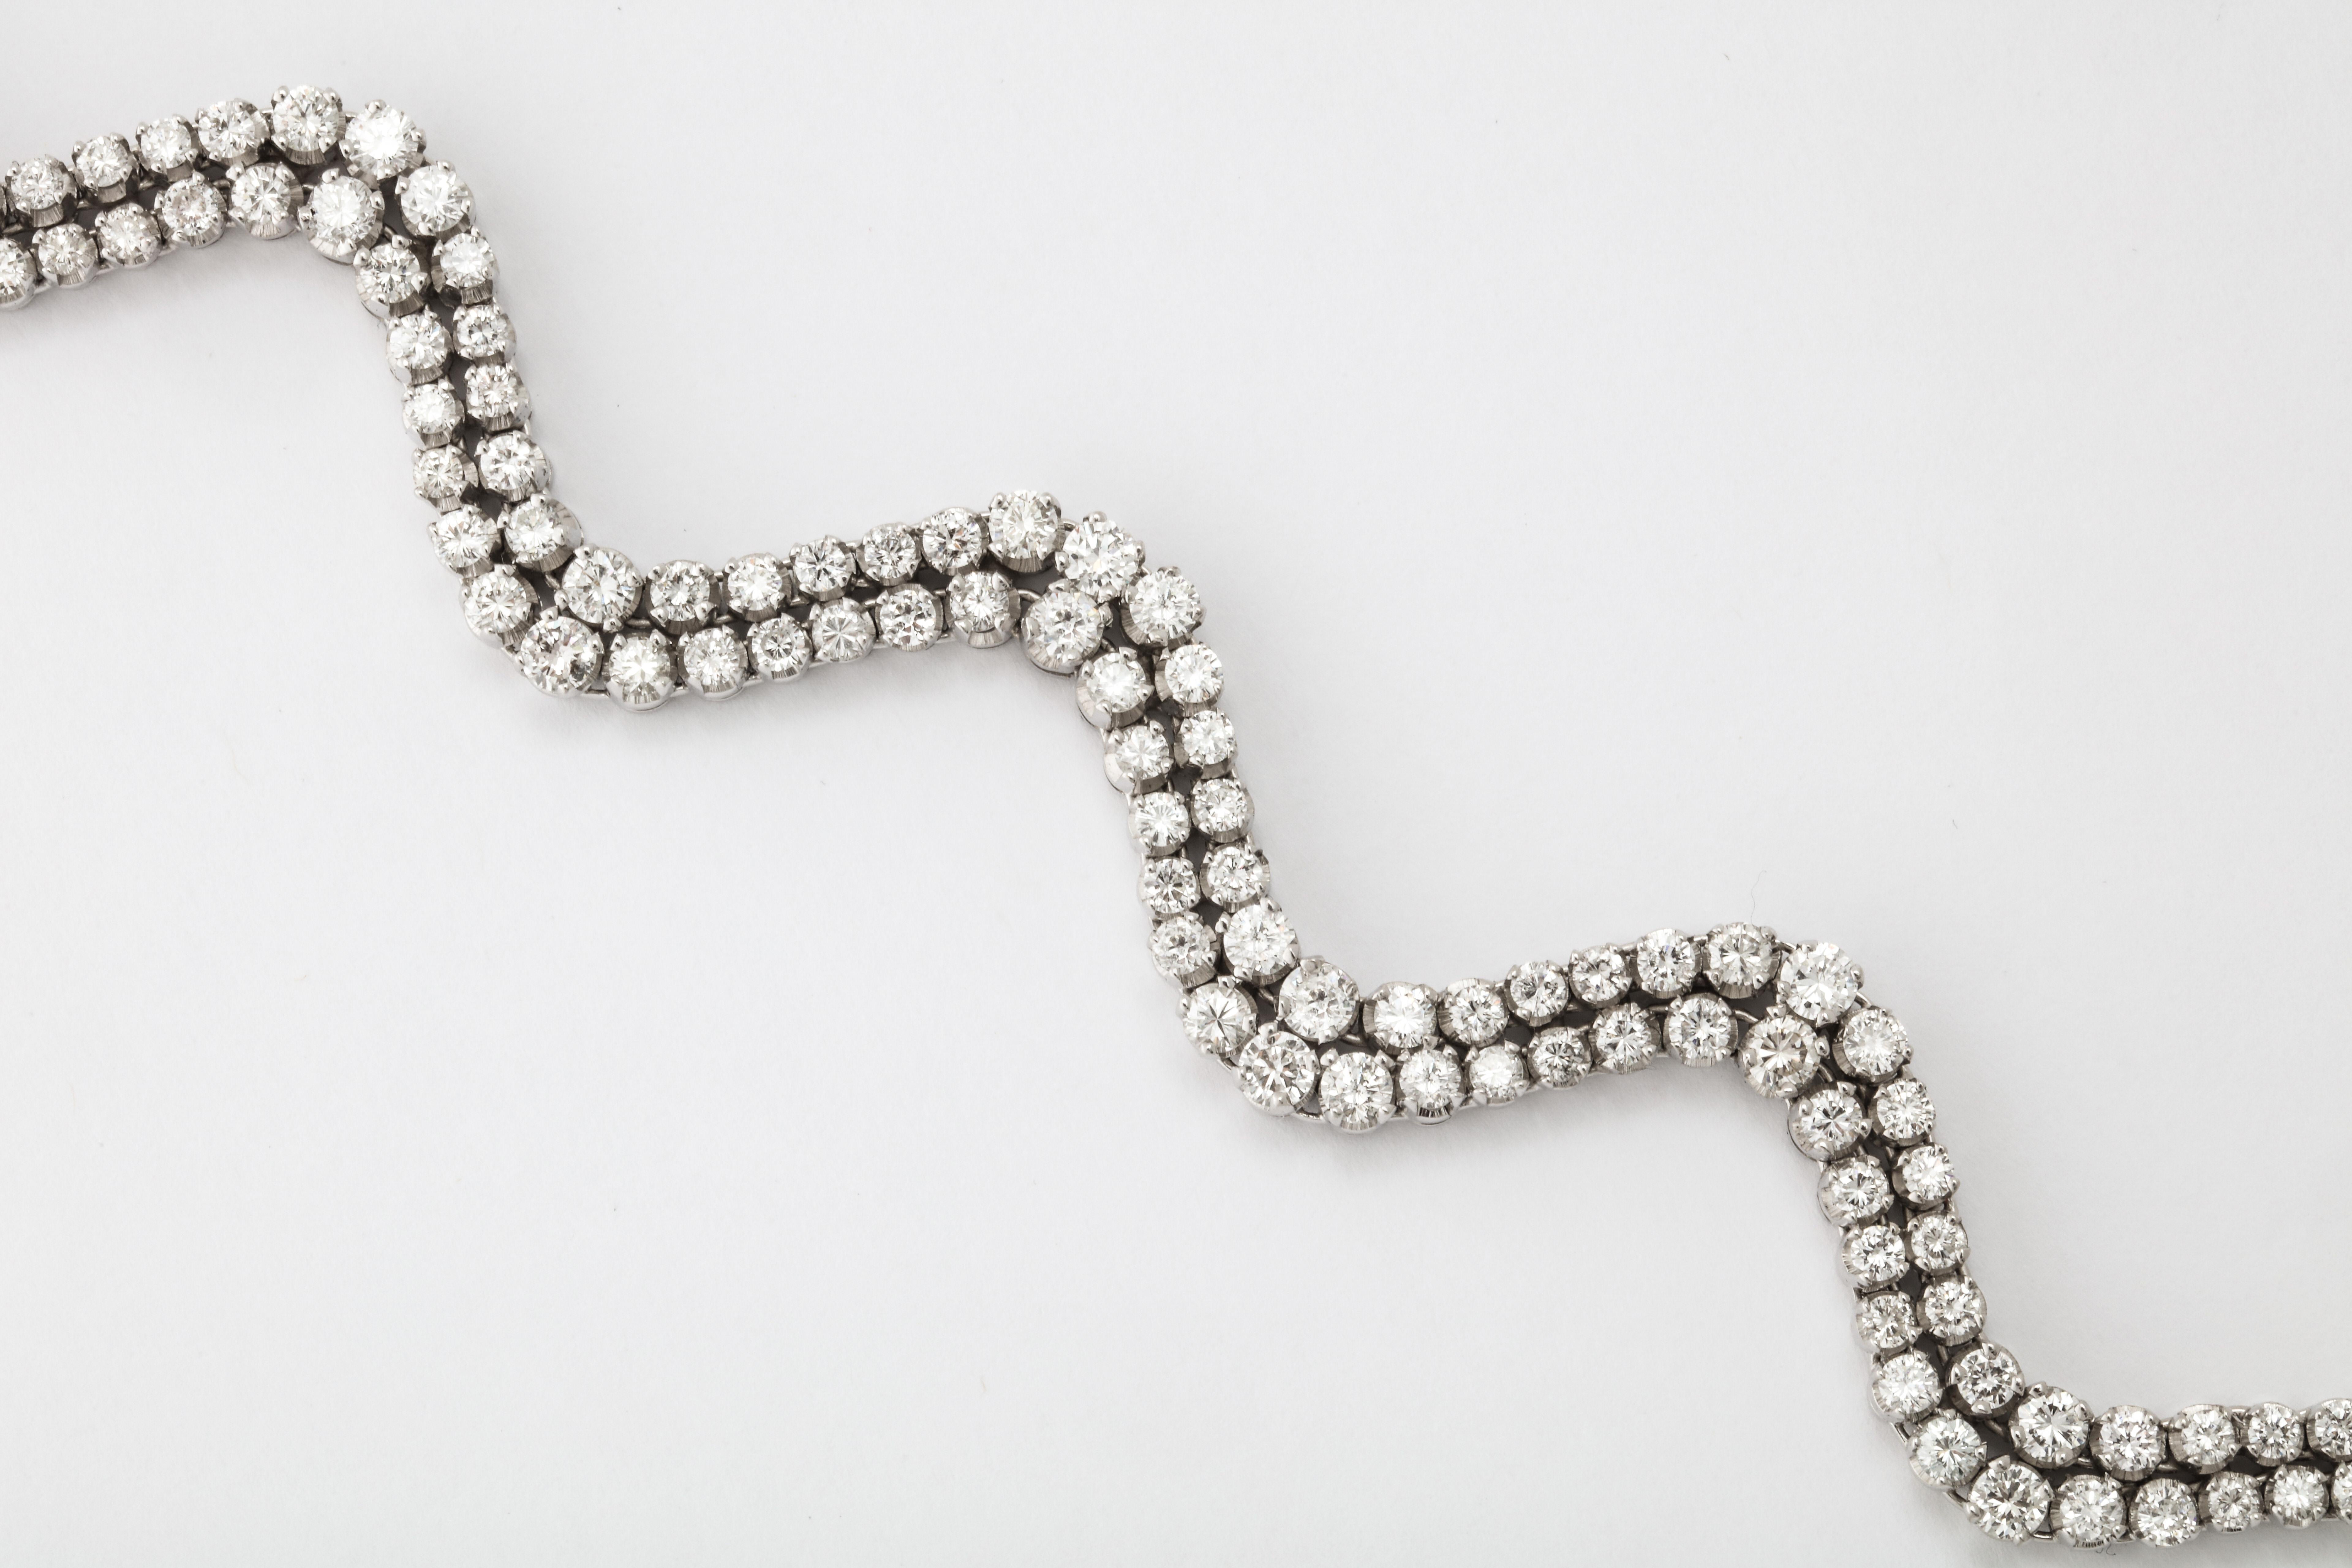 Fine Diamond Bracelet With Flexible Undulating Design In Good Condition For Sale In New York, NY